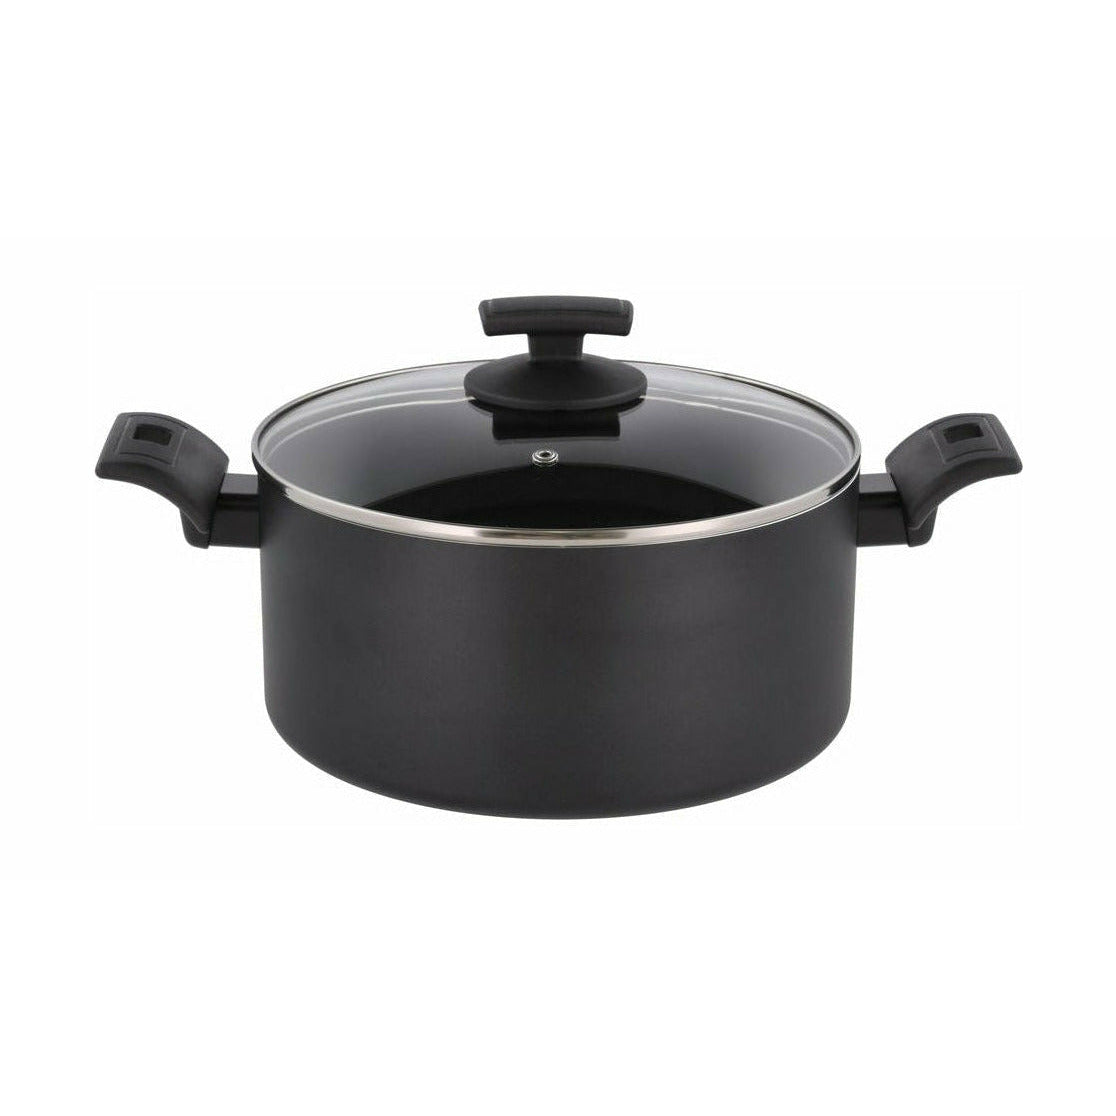 Morsø 79 Nord Reborn Cooking Pot With Lid, 5 Liters